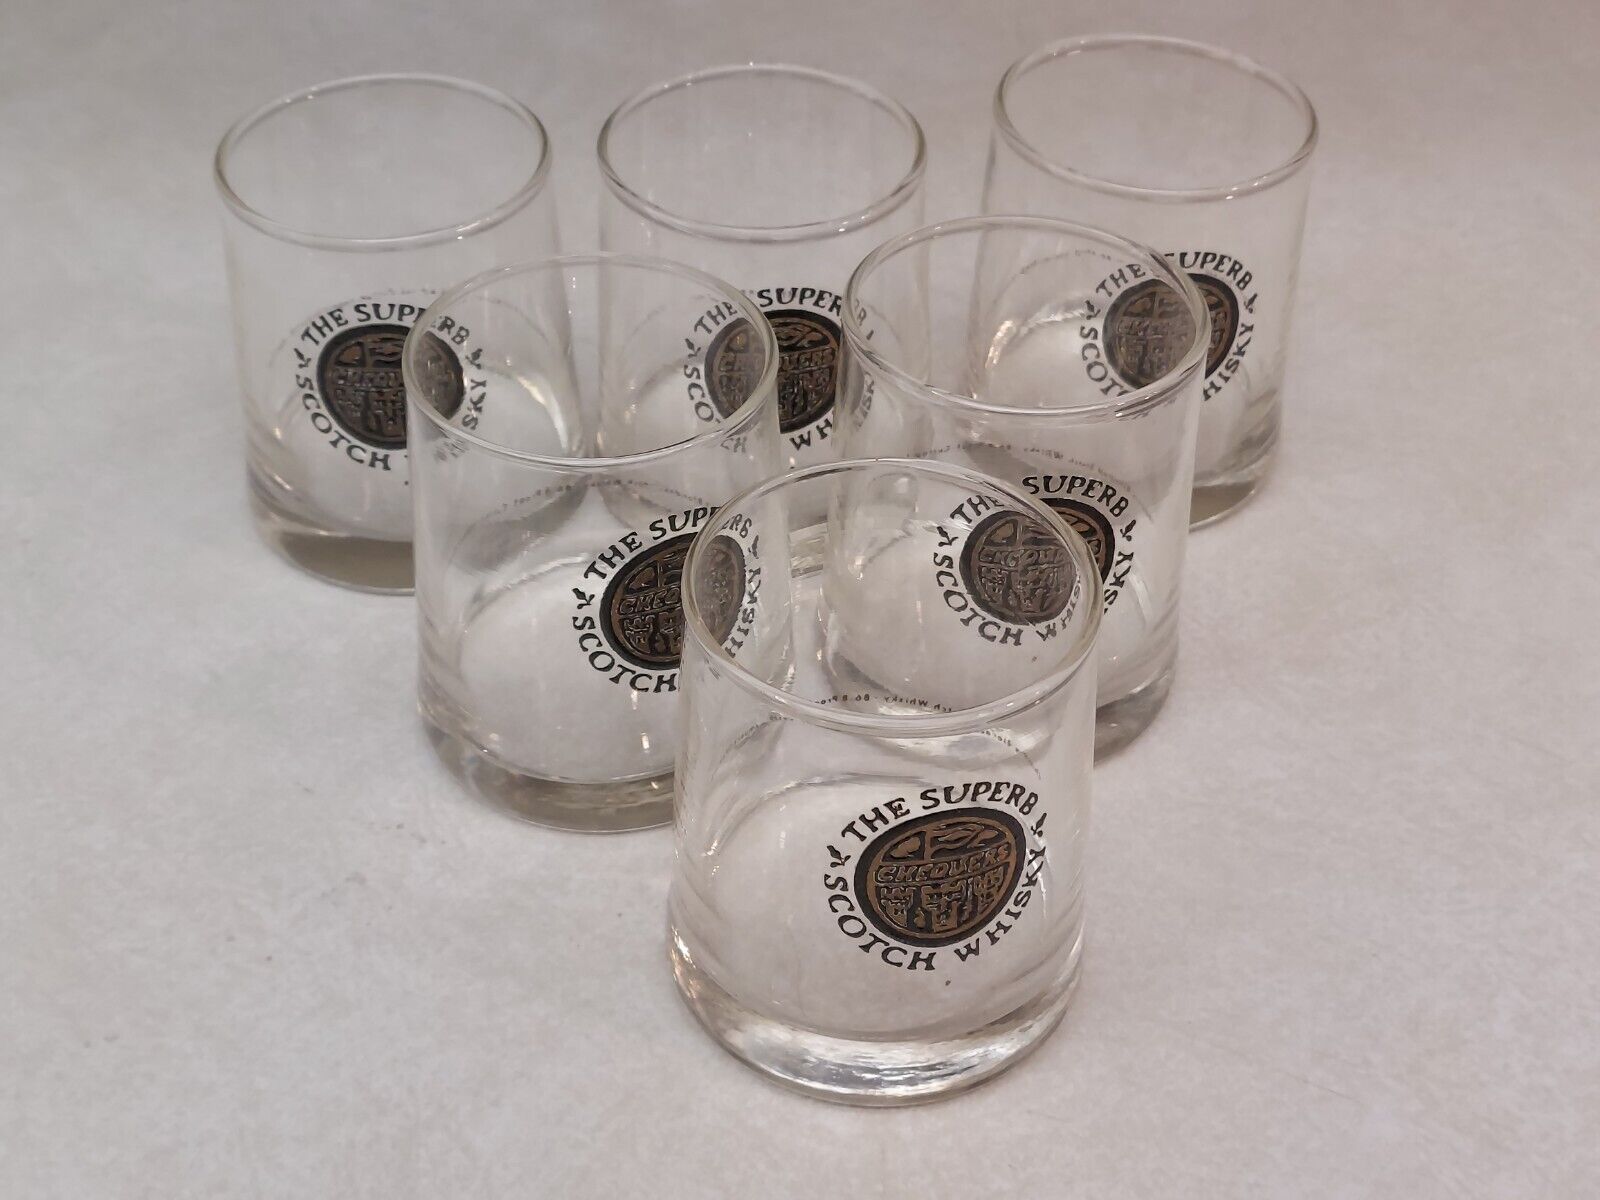 Chequers The Superb Scotch Whiskey Lot of 6 Tumbler Glasses 1/4\